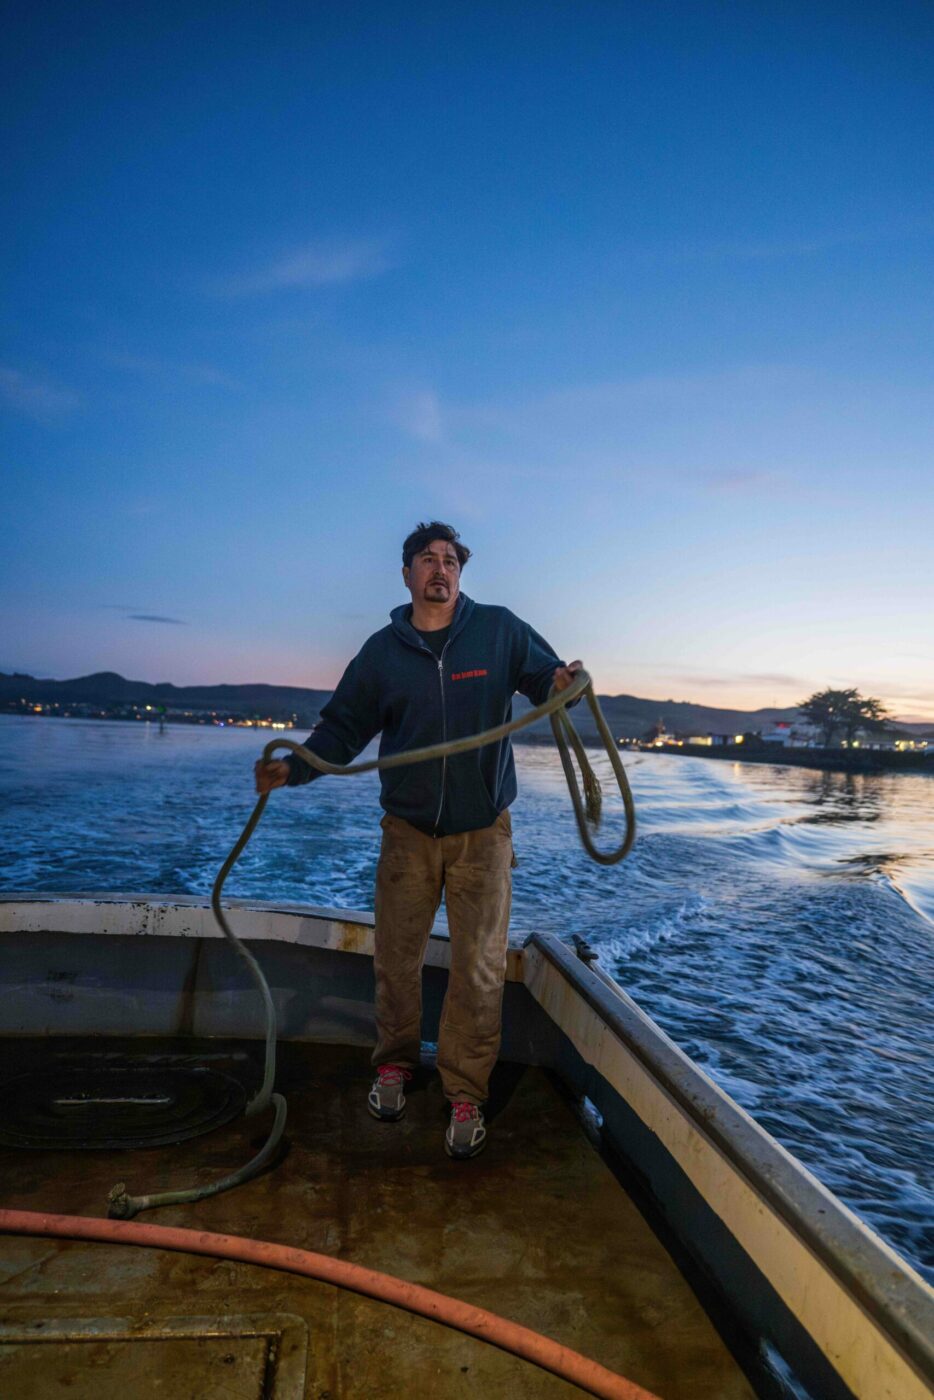 Jackson hauls lines while exiting the harbor in Bodega Bay. Early in the season, the rough ropes cause hands to swell and blister. (James Joiner)